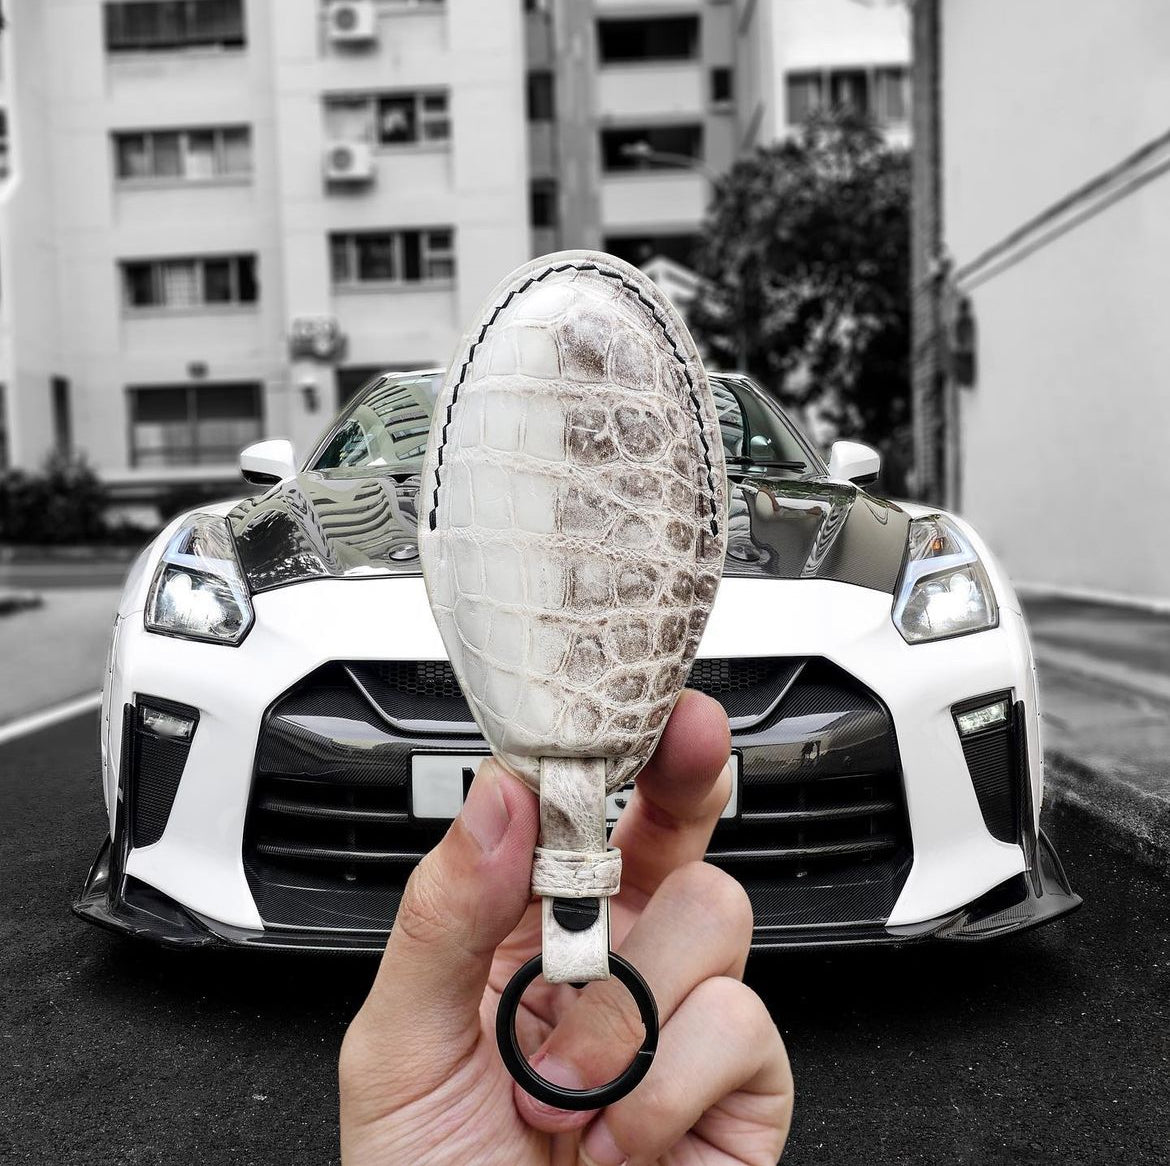 Nissan GTR Key Fob Cover Type 1 - CUSTOMIZE YOURS